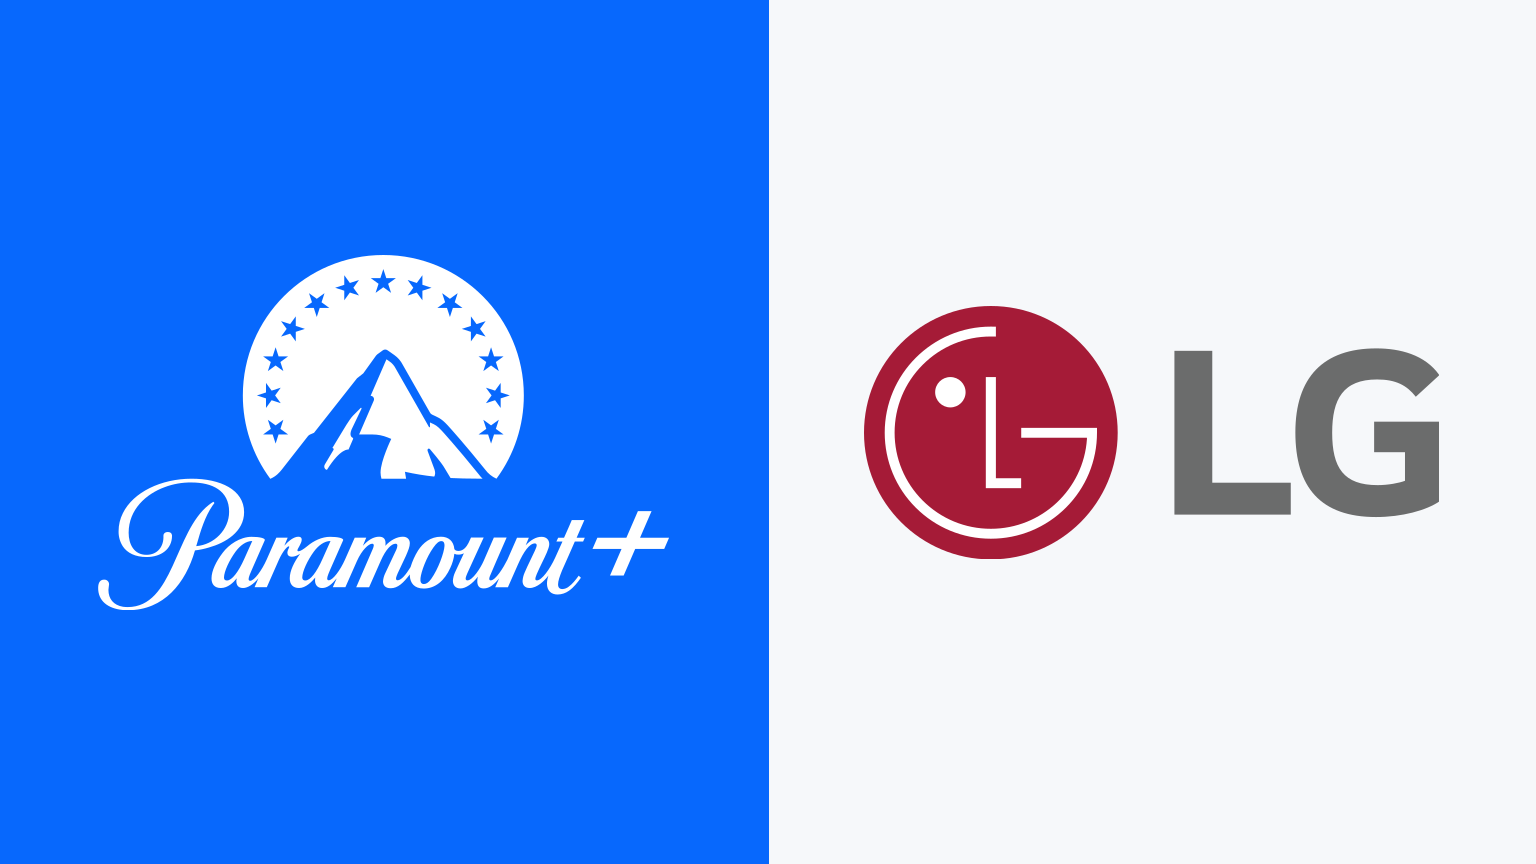 How To Add Paramount App To LG Smart TV